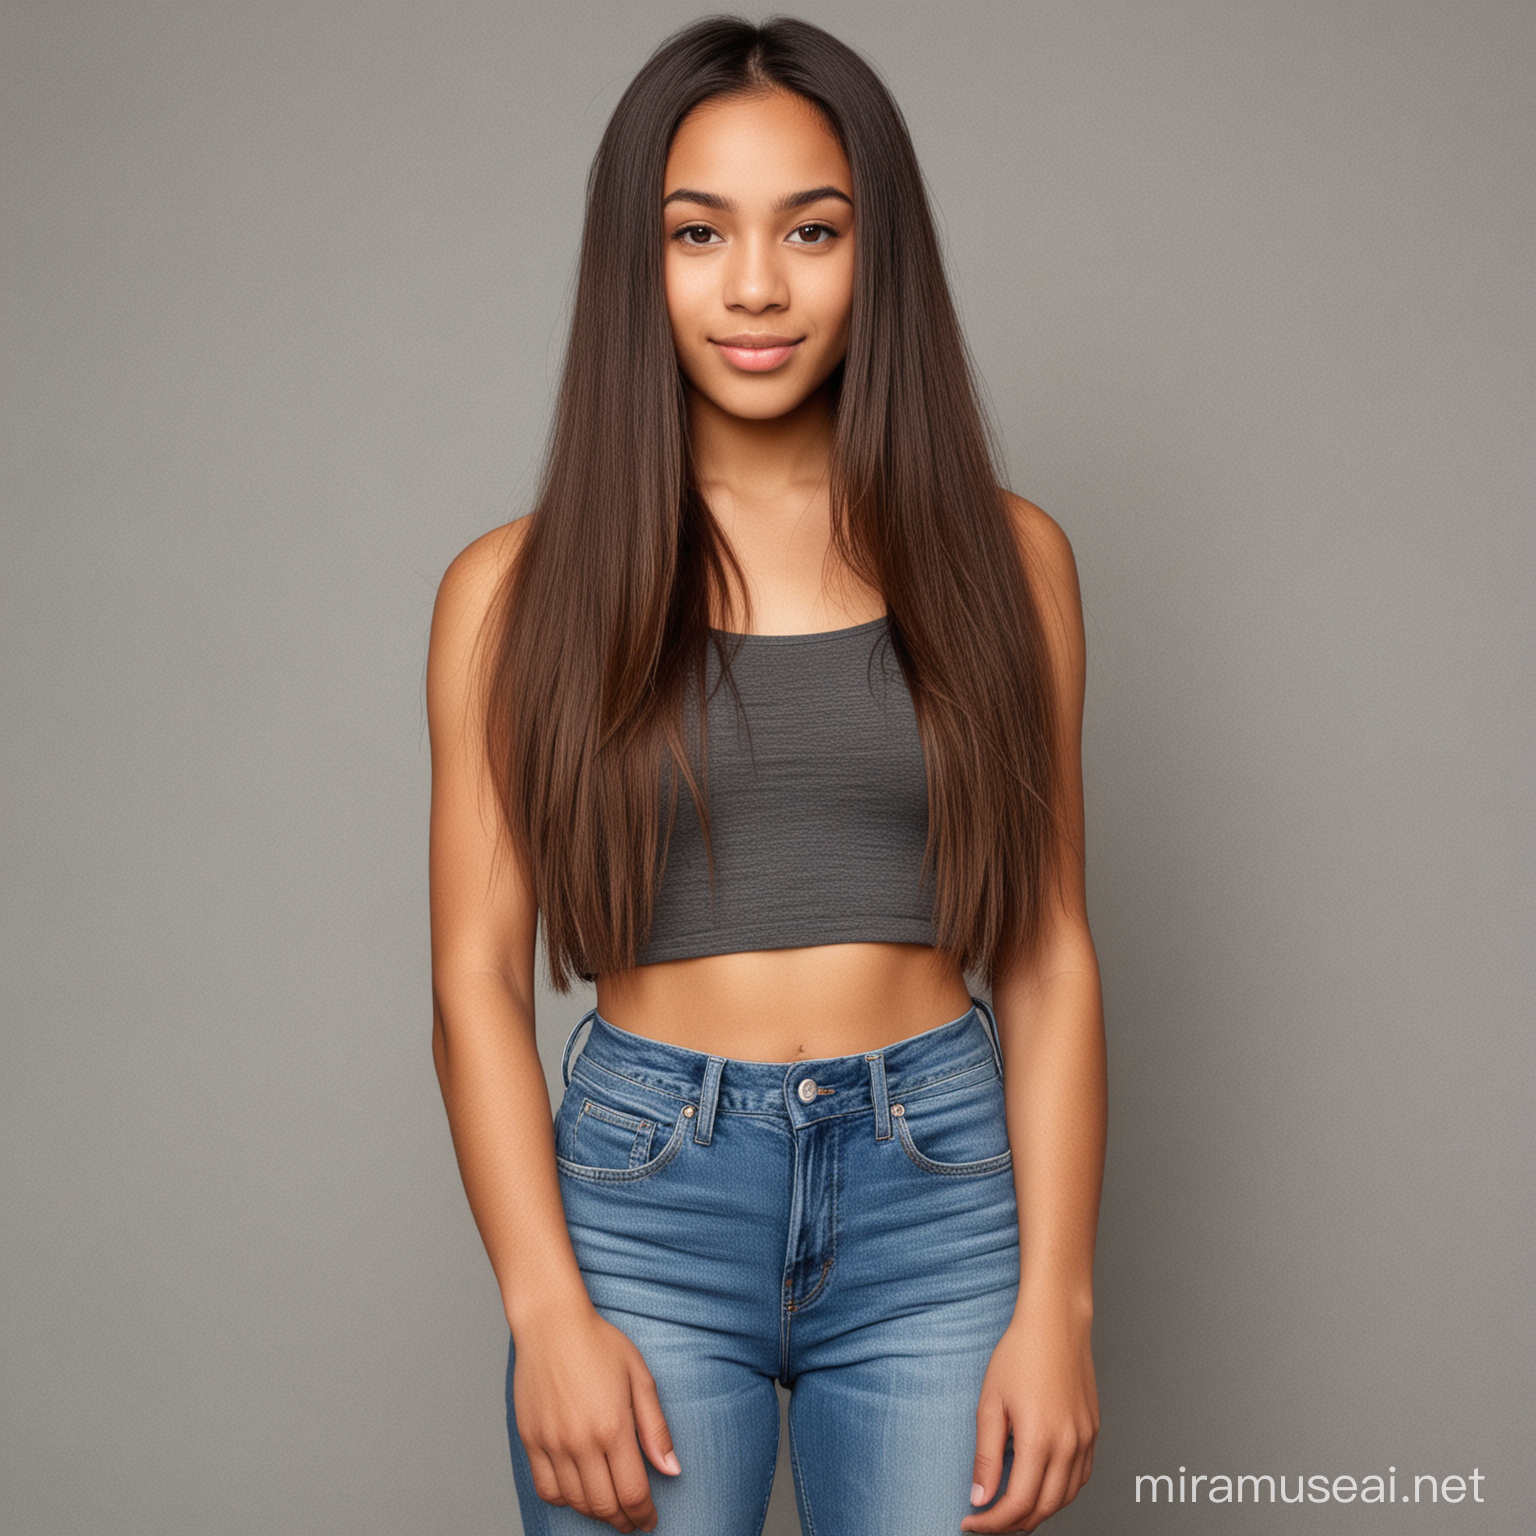 Teenage Mixed Race Girl with Straight Hair Youthful Portrait